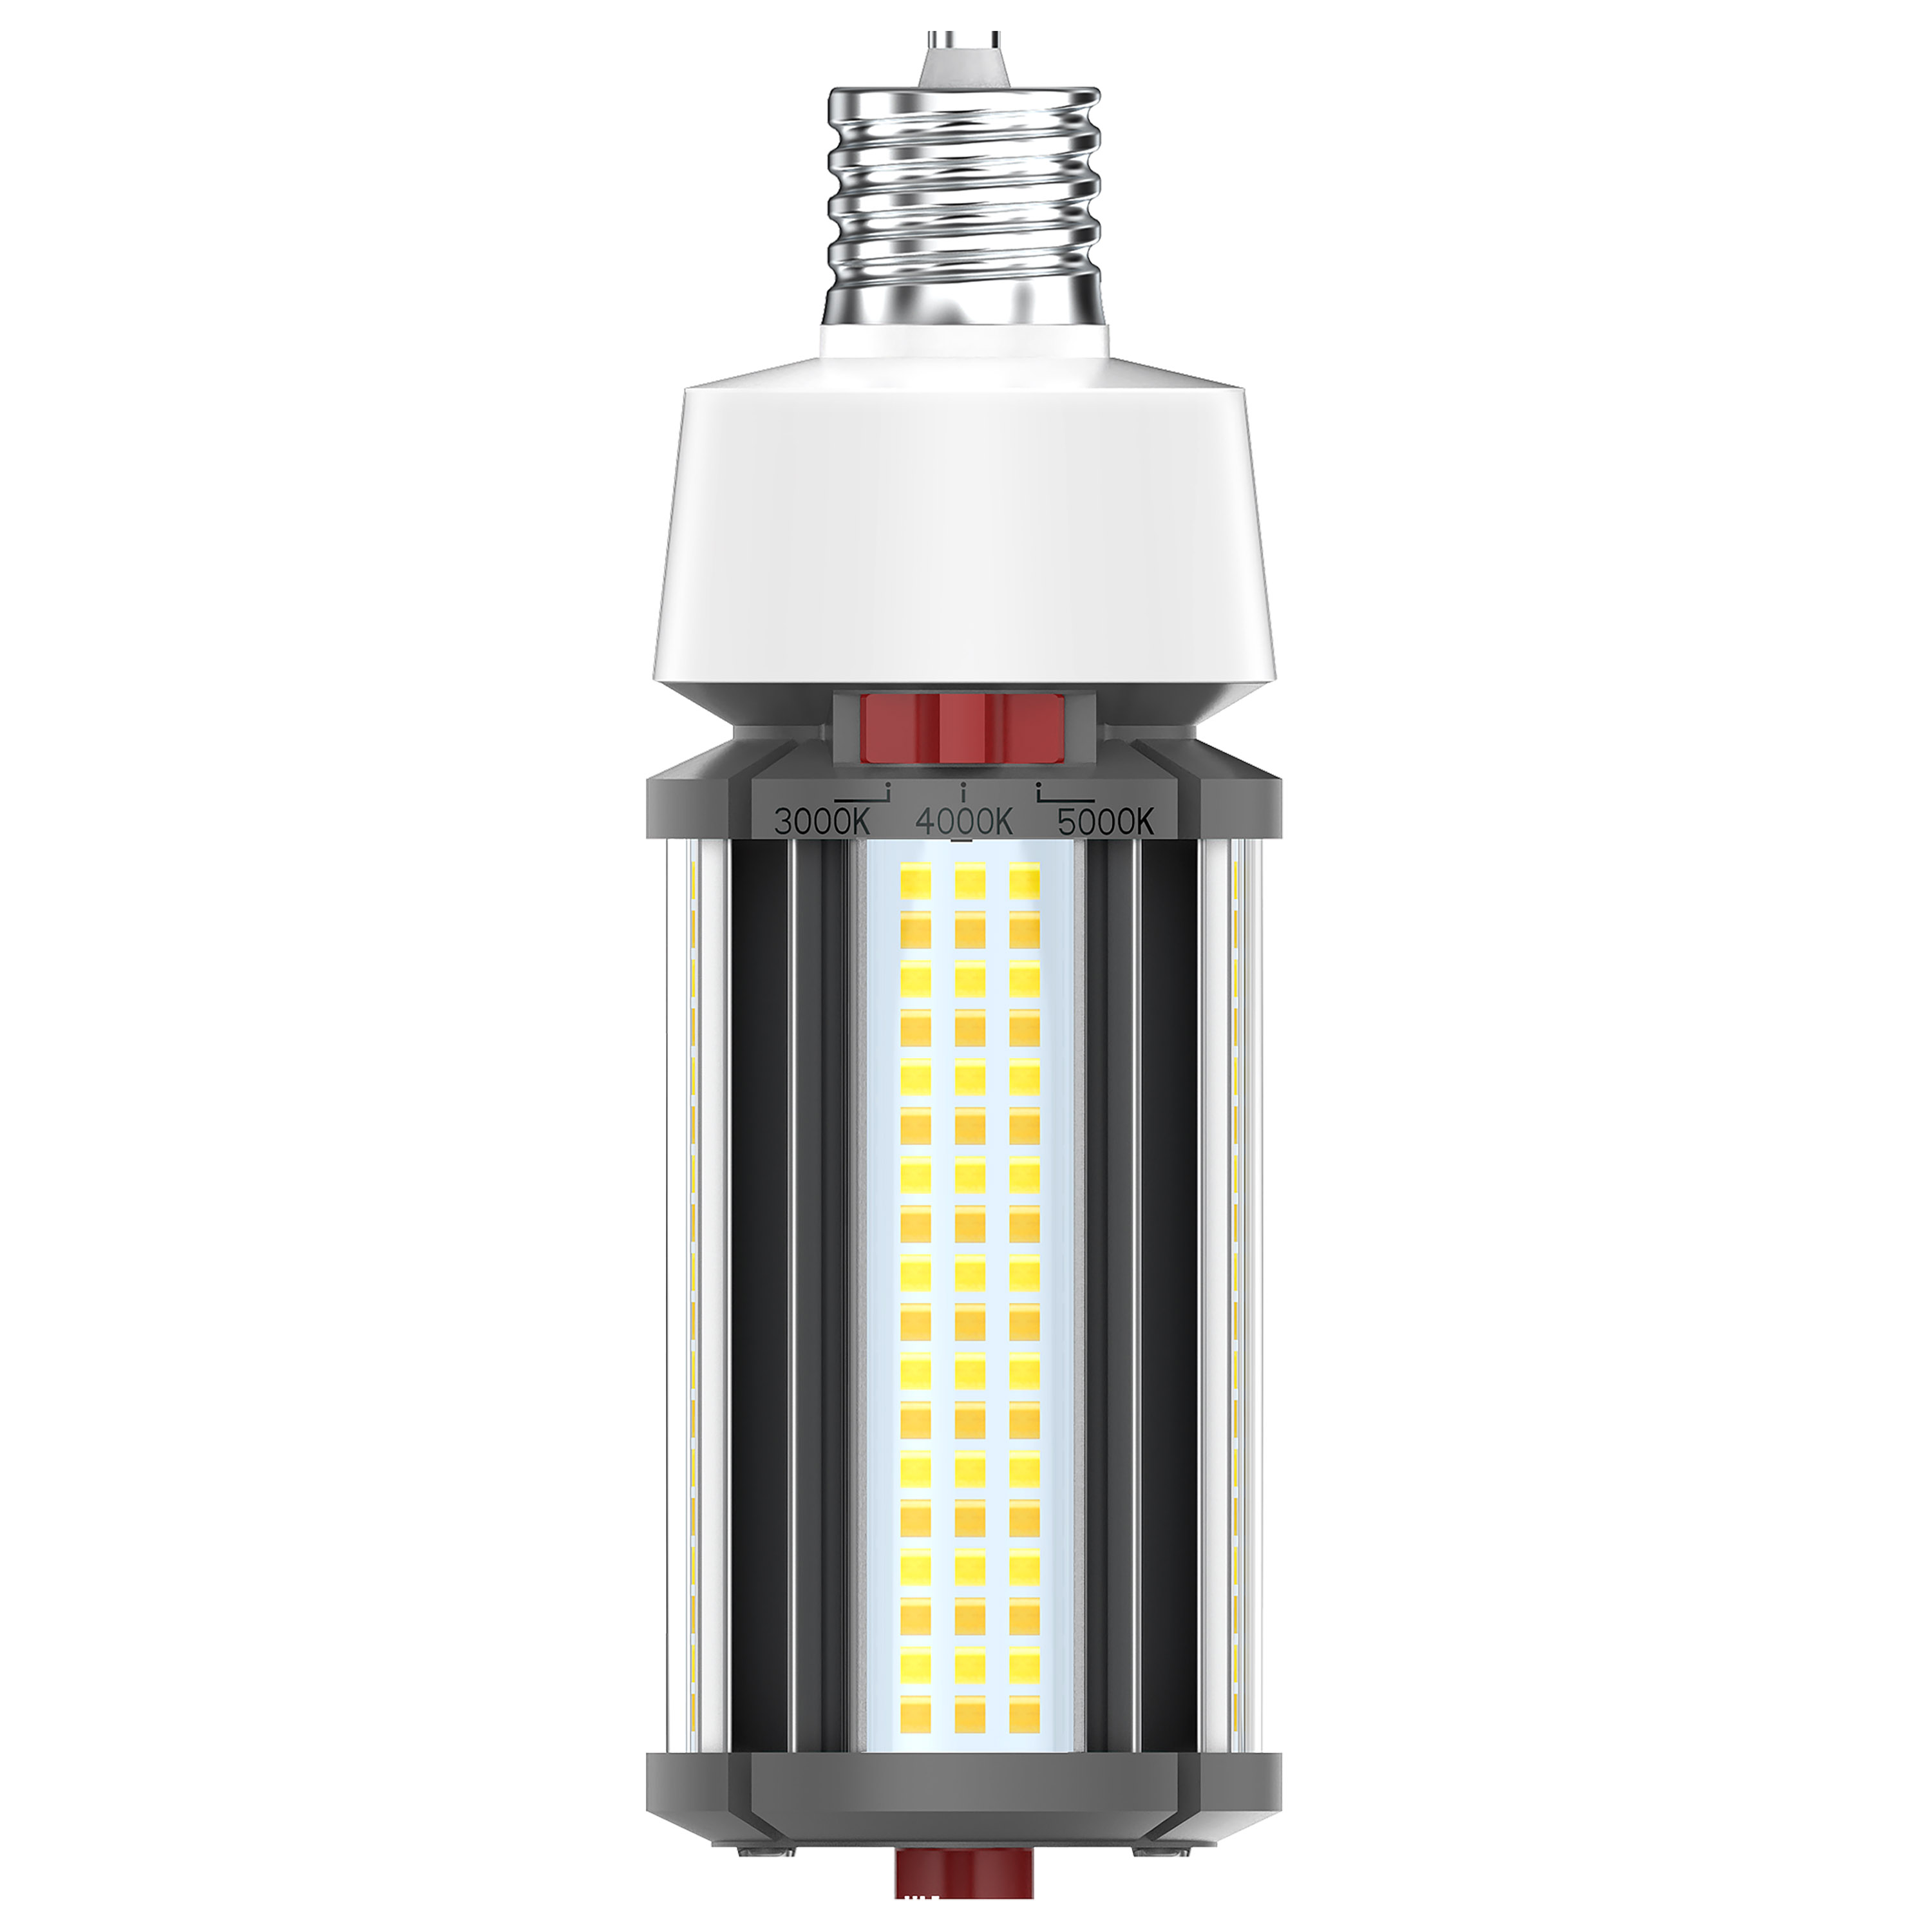 SAT S23151 27/22/18 WATTAGE SELECTABLE LED (125W/100W/75W HID REPLACEMENT) 30K/40K/50K CCT SELECTABLE TYPE B BALLAST BYPASS MOGUL EXTENDED BASE 100-277V